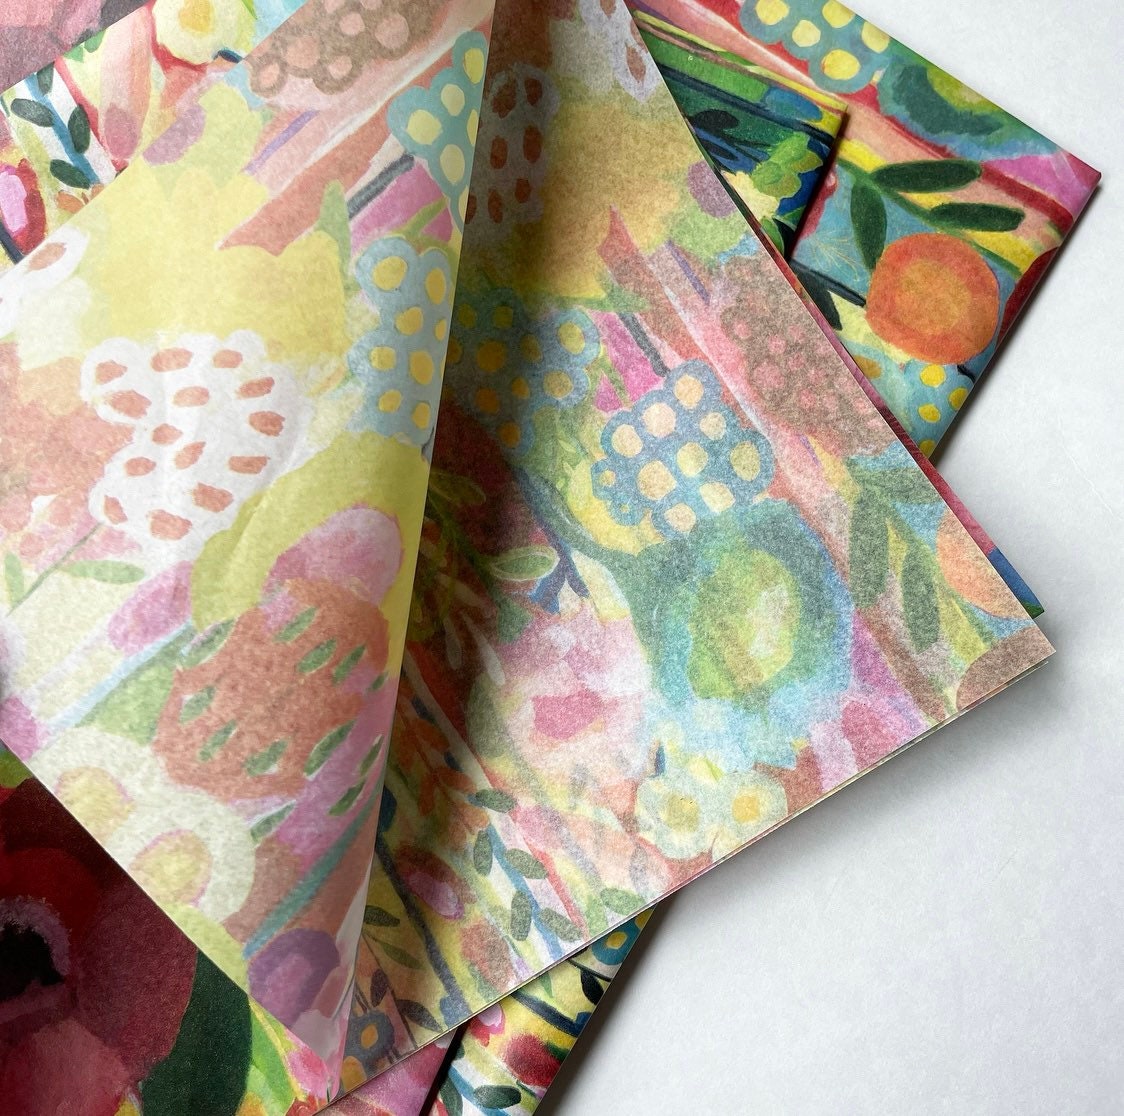 WILDWOOD Tissue Paper Sheets / Gift Present Wrapping Craft Supply Retail  Store Packaging Nature Flowers Berries Floral Farm Country Woodland 